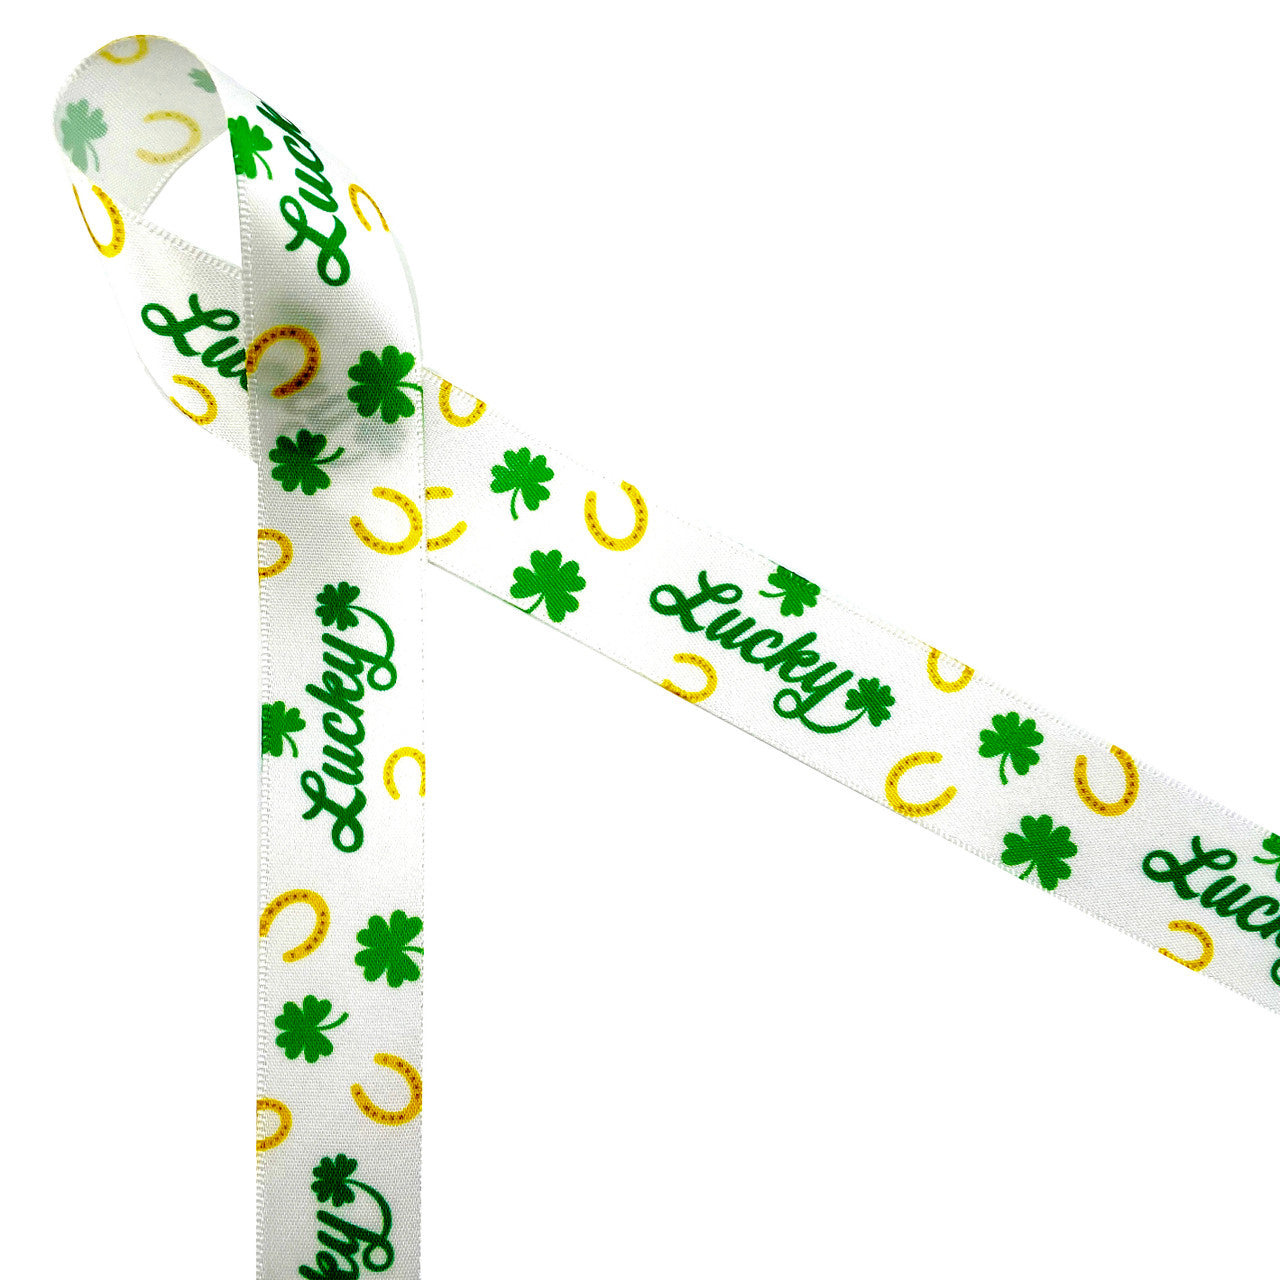 Our Lucky ribbon is perfect for St Patrick's Day and Equestrian events. Lucky in Kelly green with shamrocks and gold horse shoes in  the background printed on 7/8" white single face satin ribbon is a fun ribbon for gift wrap, gift baskets, party favors, party decor, bows, hair bows and hat bands. This is ideal for ribbon crafts of wreath making, sewing, scrap booking and quilting projects too. All our ribbon is designed and printed in the USA